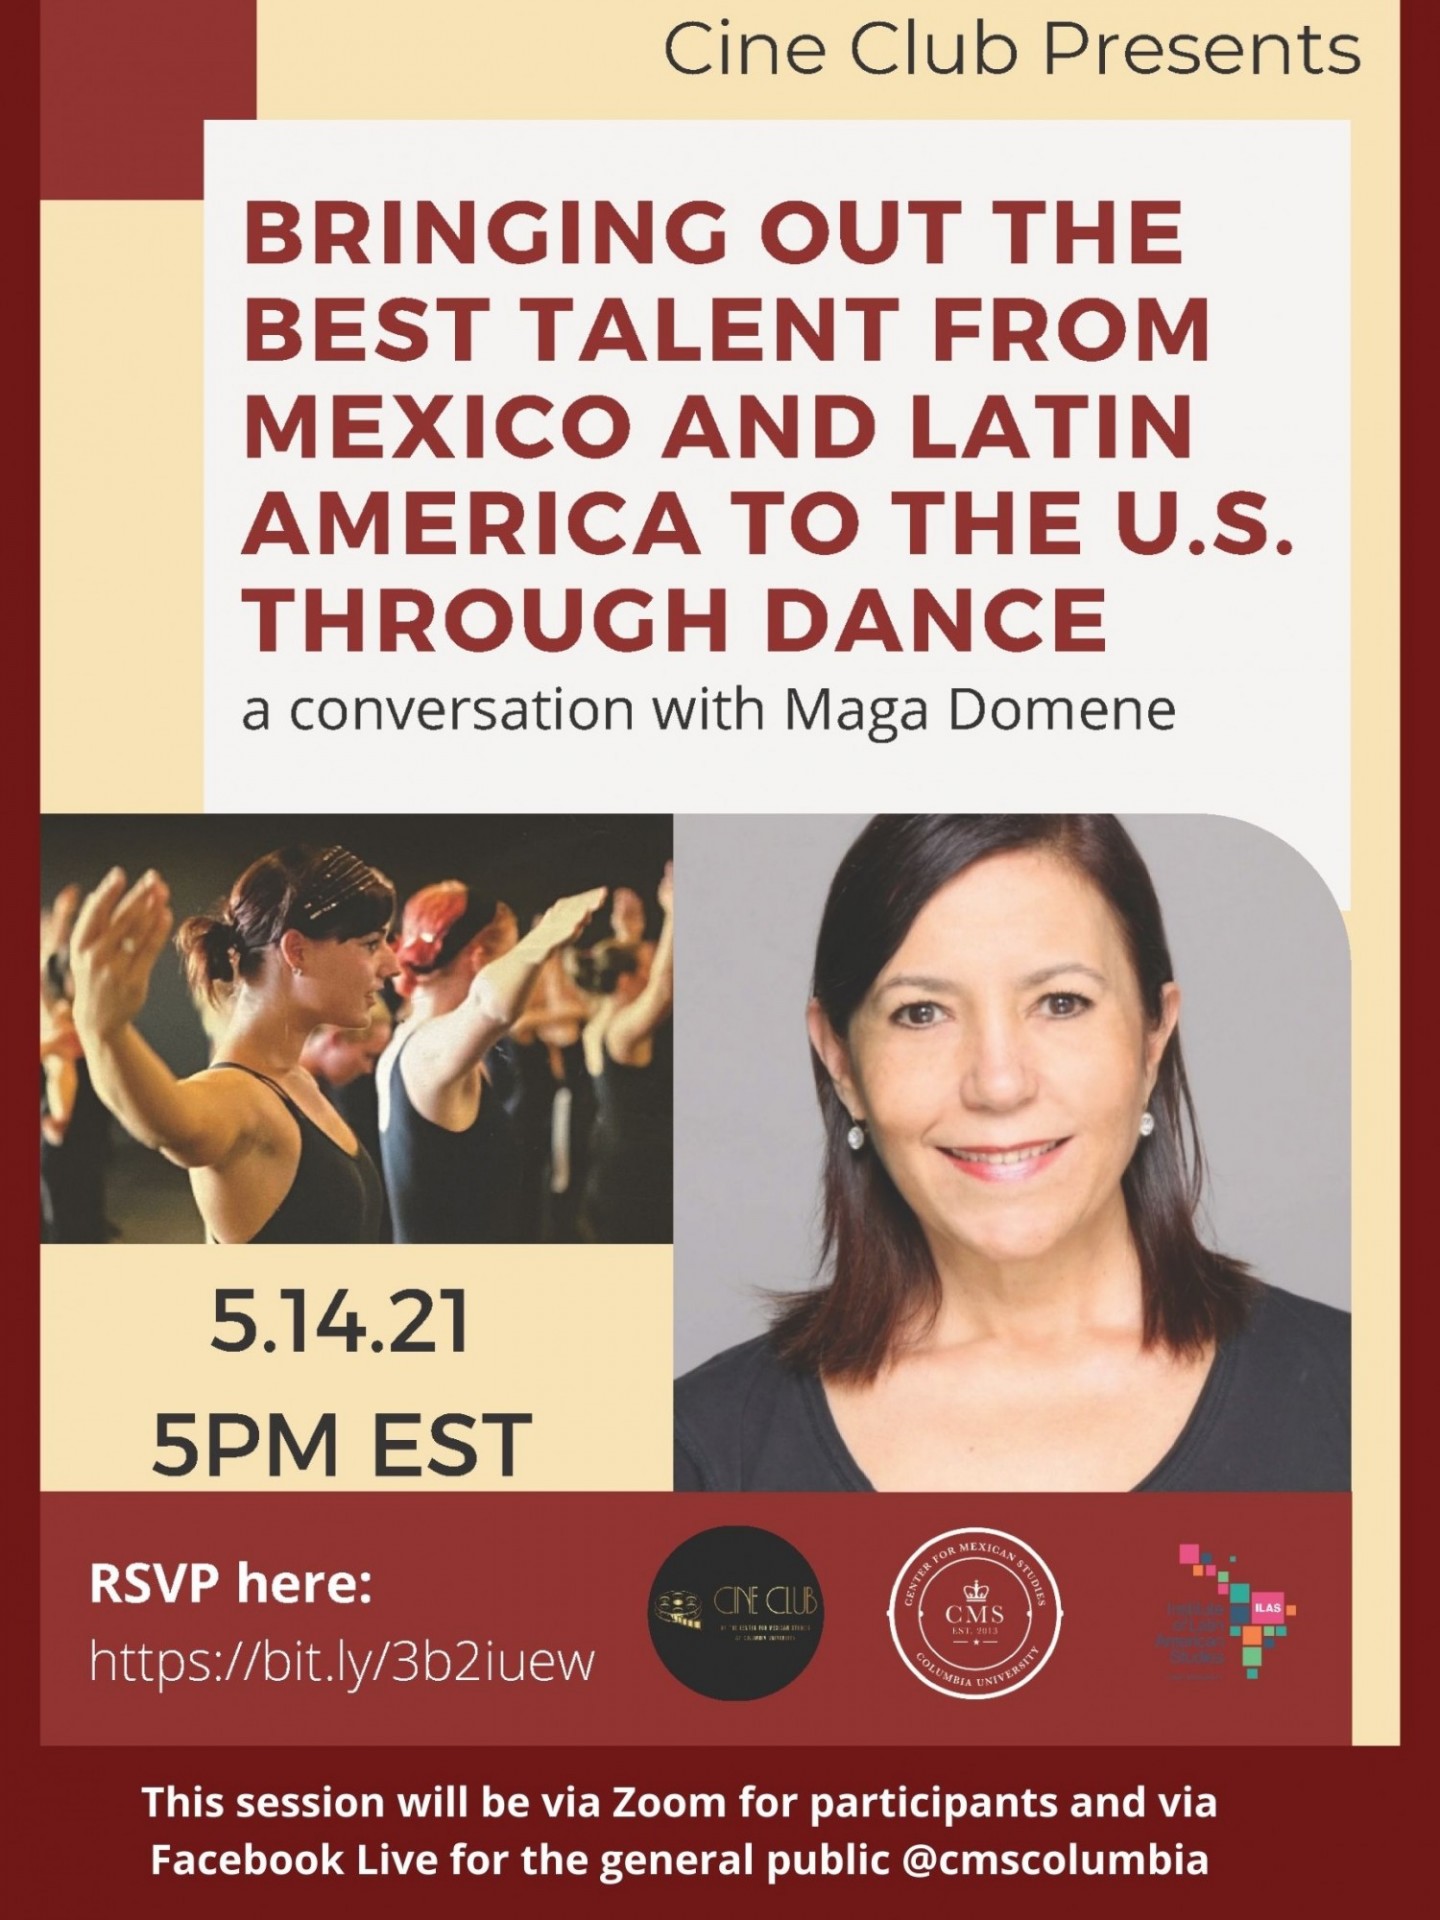 Maga Domene at Columbia - Bringing out the Best Talent from Mexico and Latin America to the U.S. through Dance 